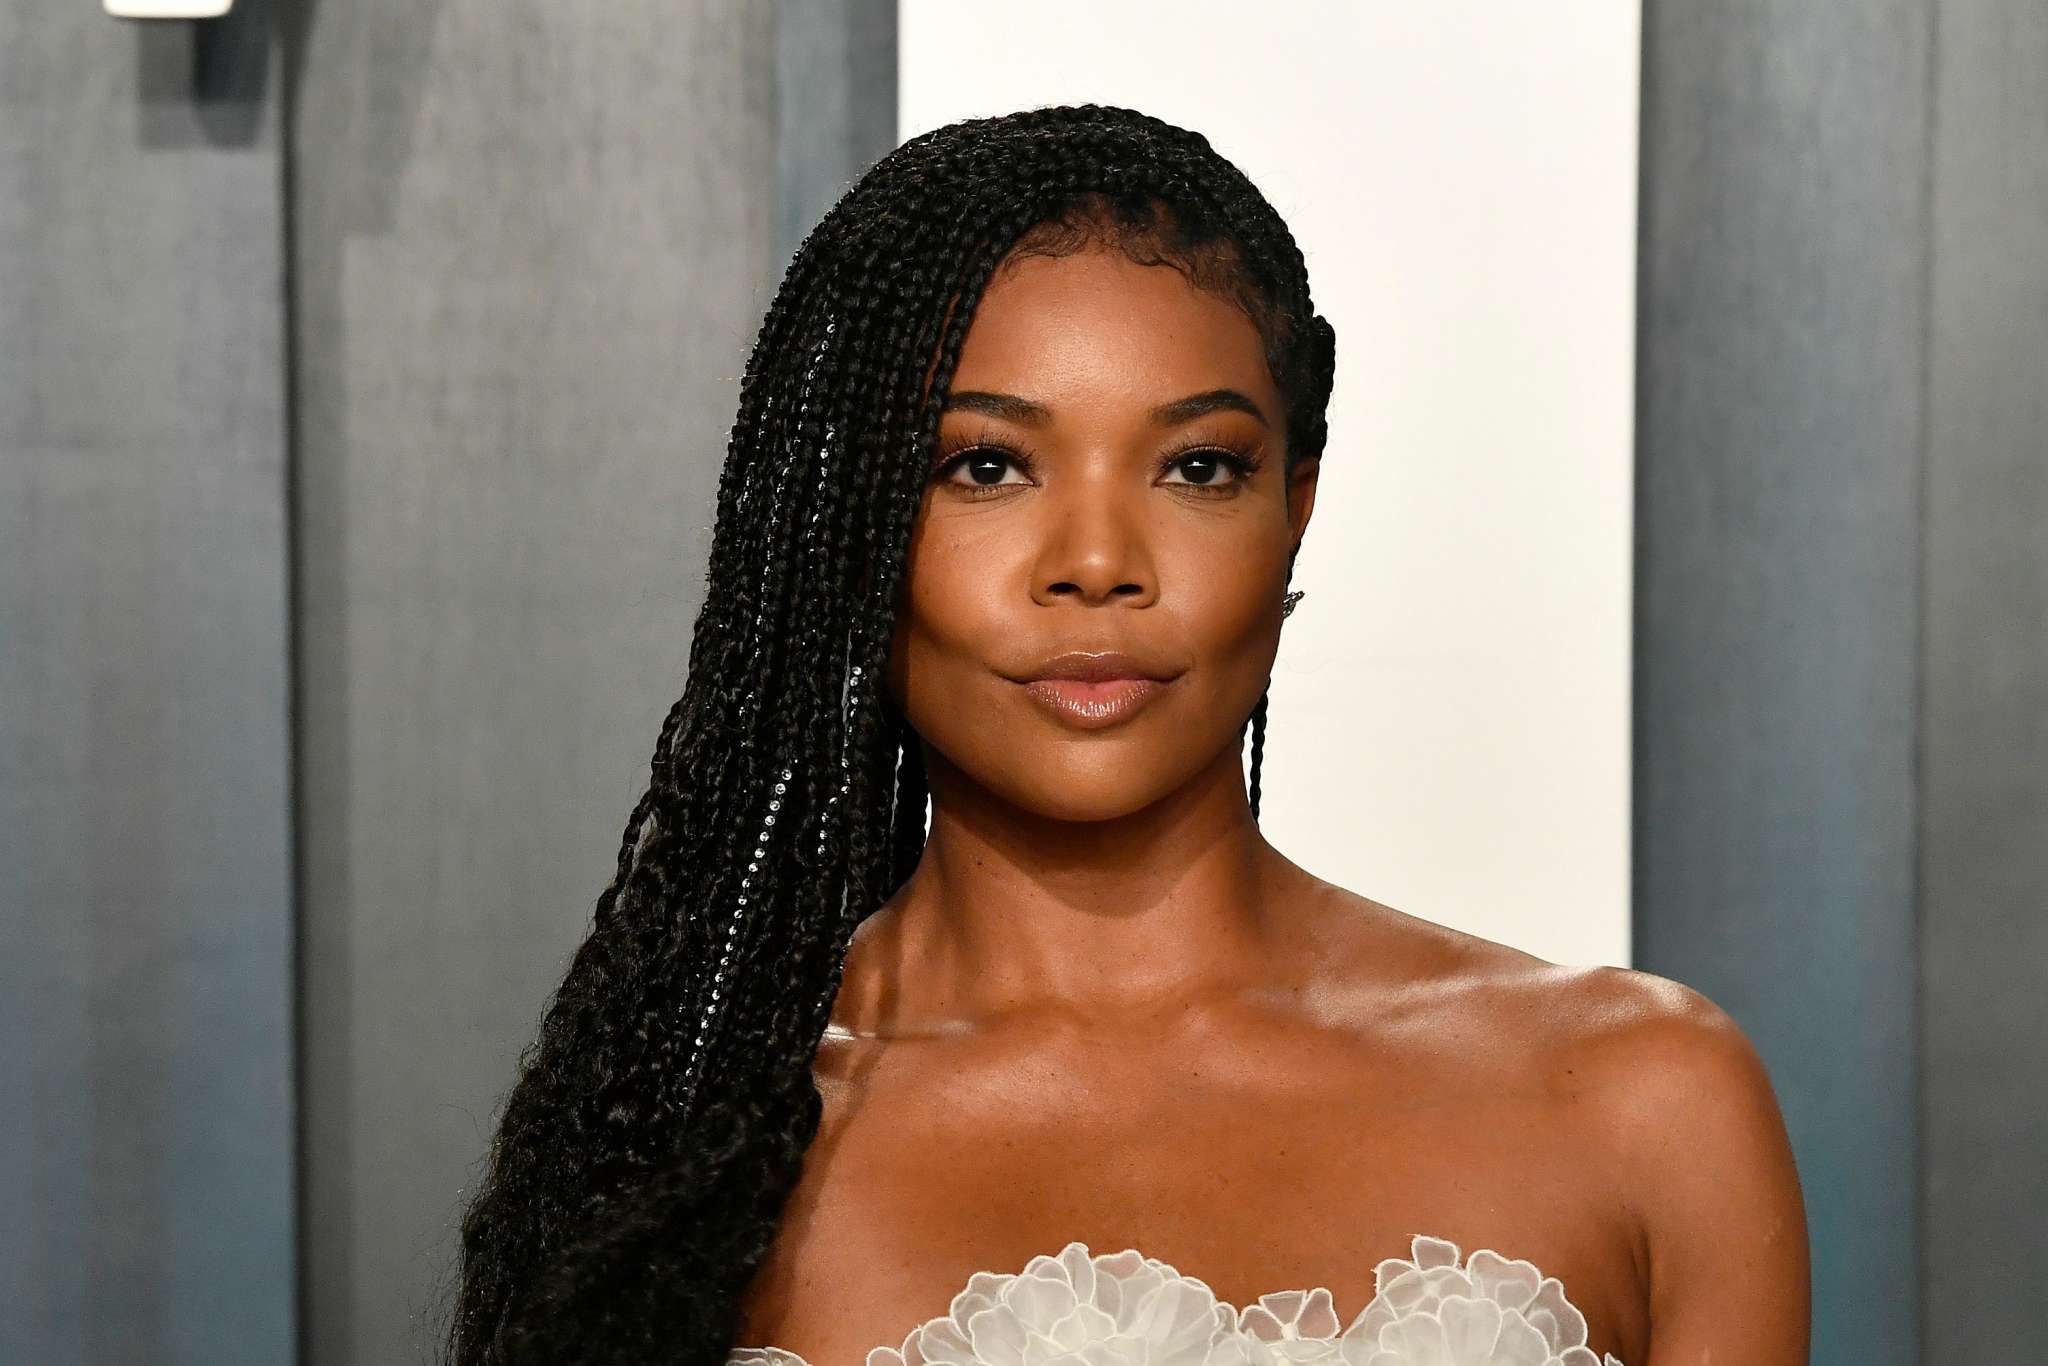 gabrielle-union-shows-off-her-curves-and-2022-energy-in-these-family-pics